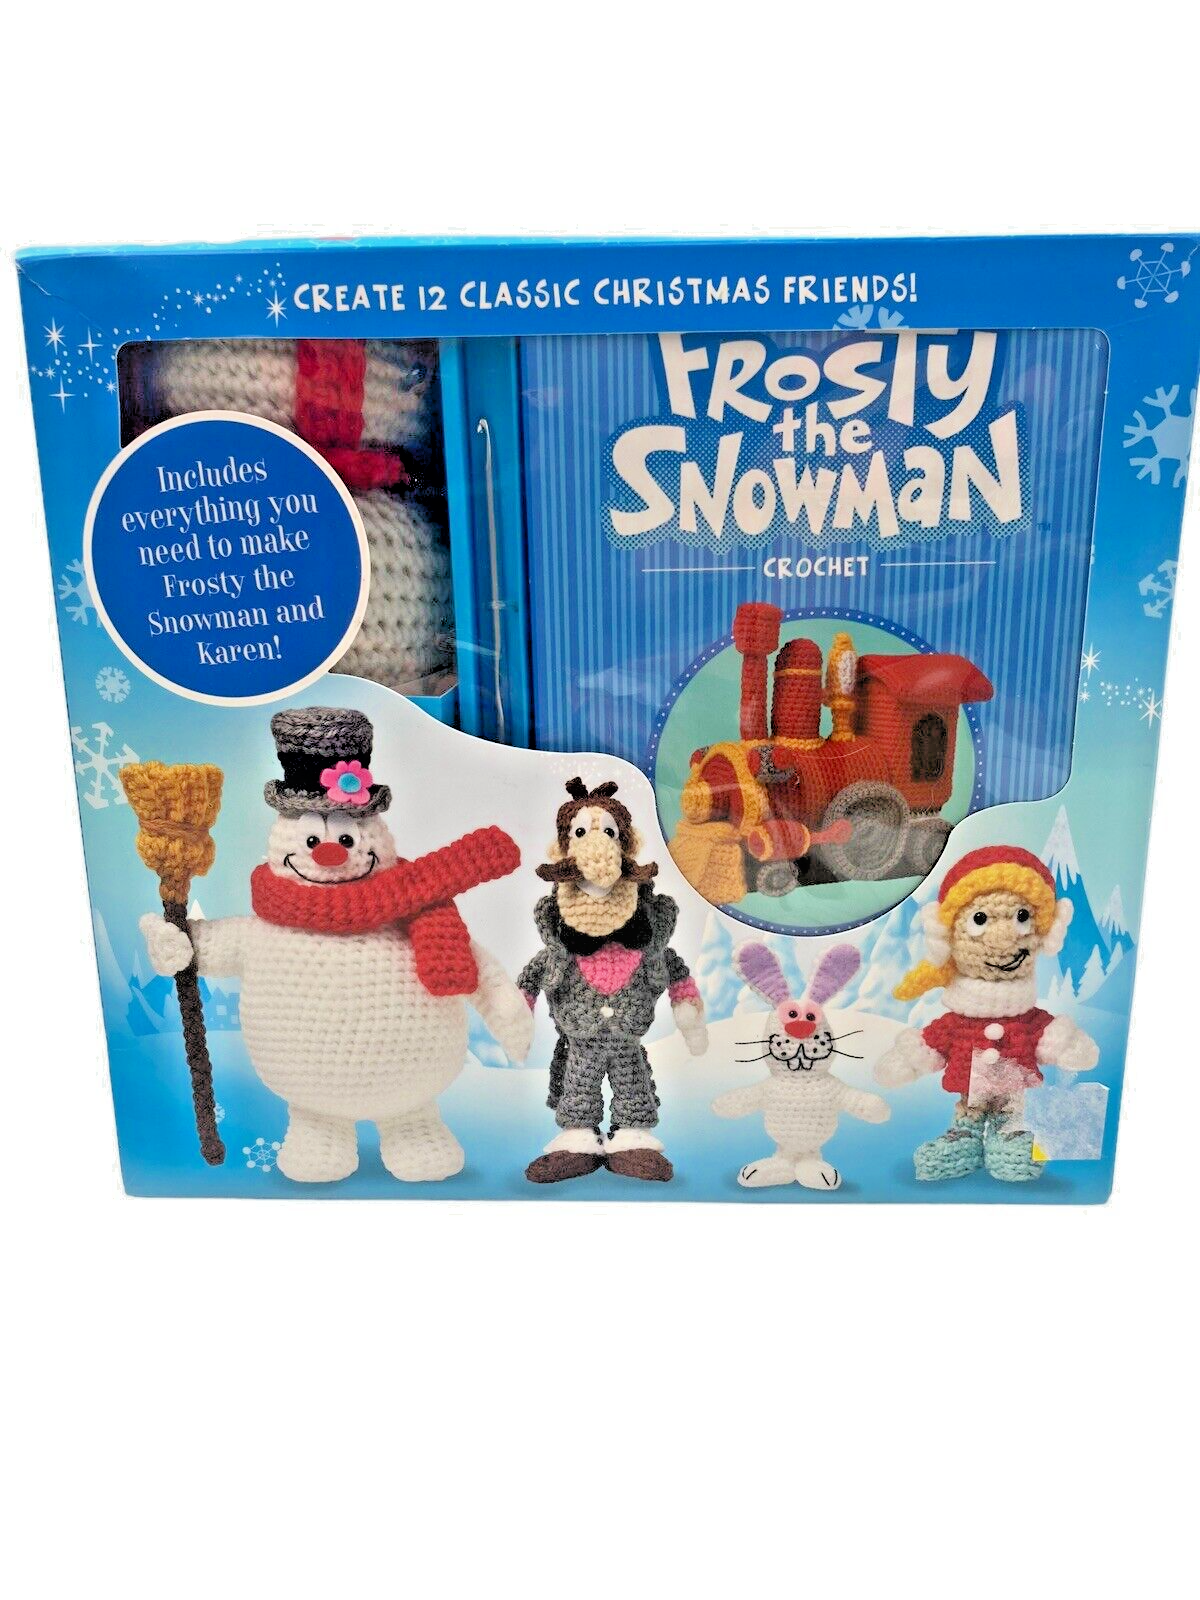 Primary image for “Frosty The Snowman” Crochet Kit With 12 Project Book Frosty The Snowman, & More